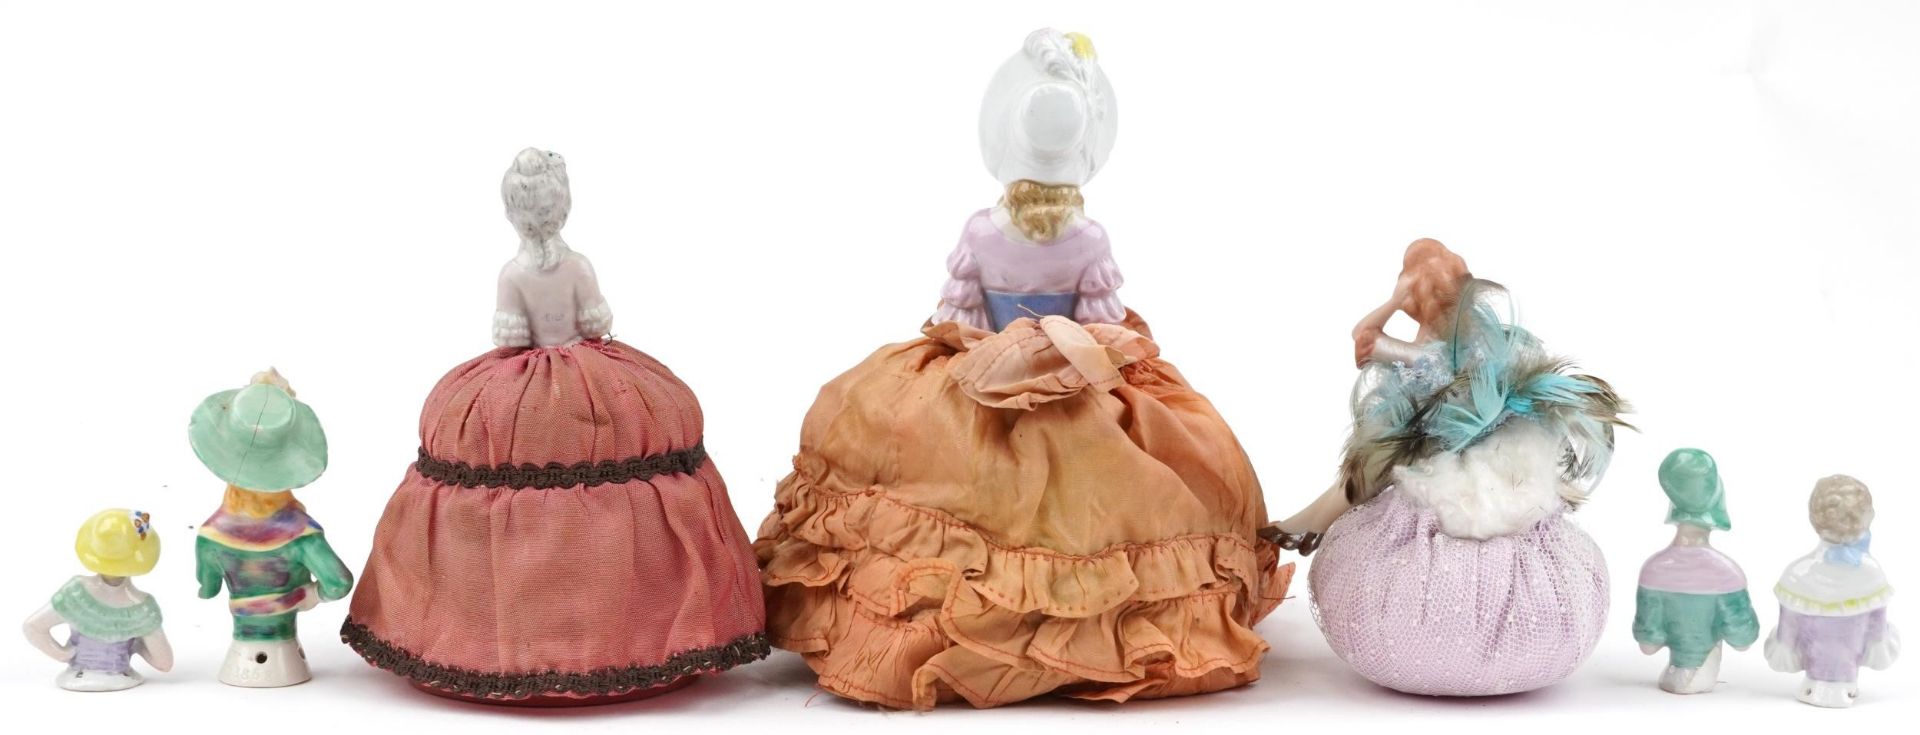 19th century and later half pin dolls including three pin cushions, the largest 21cm high - Image 4 of 5